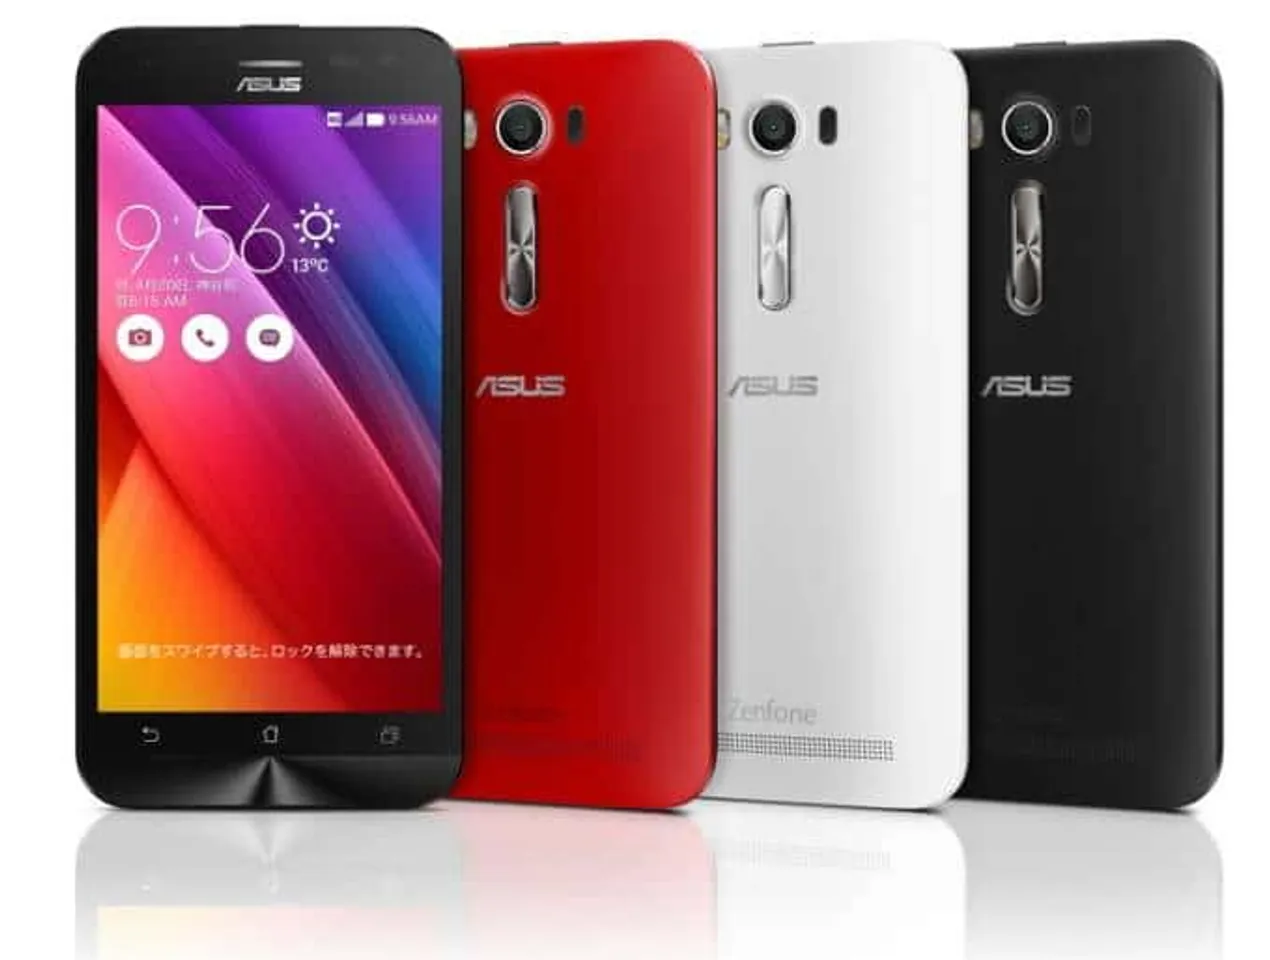 Asus Zenfone 2 Laser 5.5 available on Flipkart, priced at Rs. 13,999